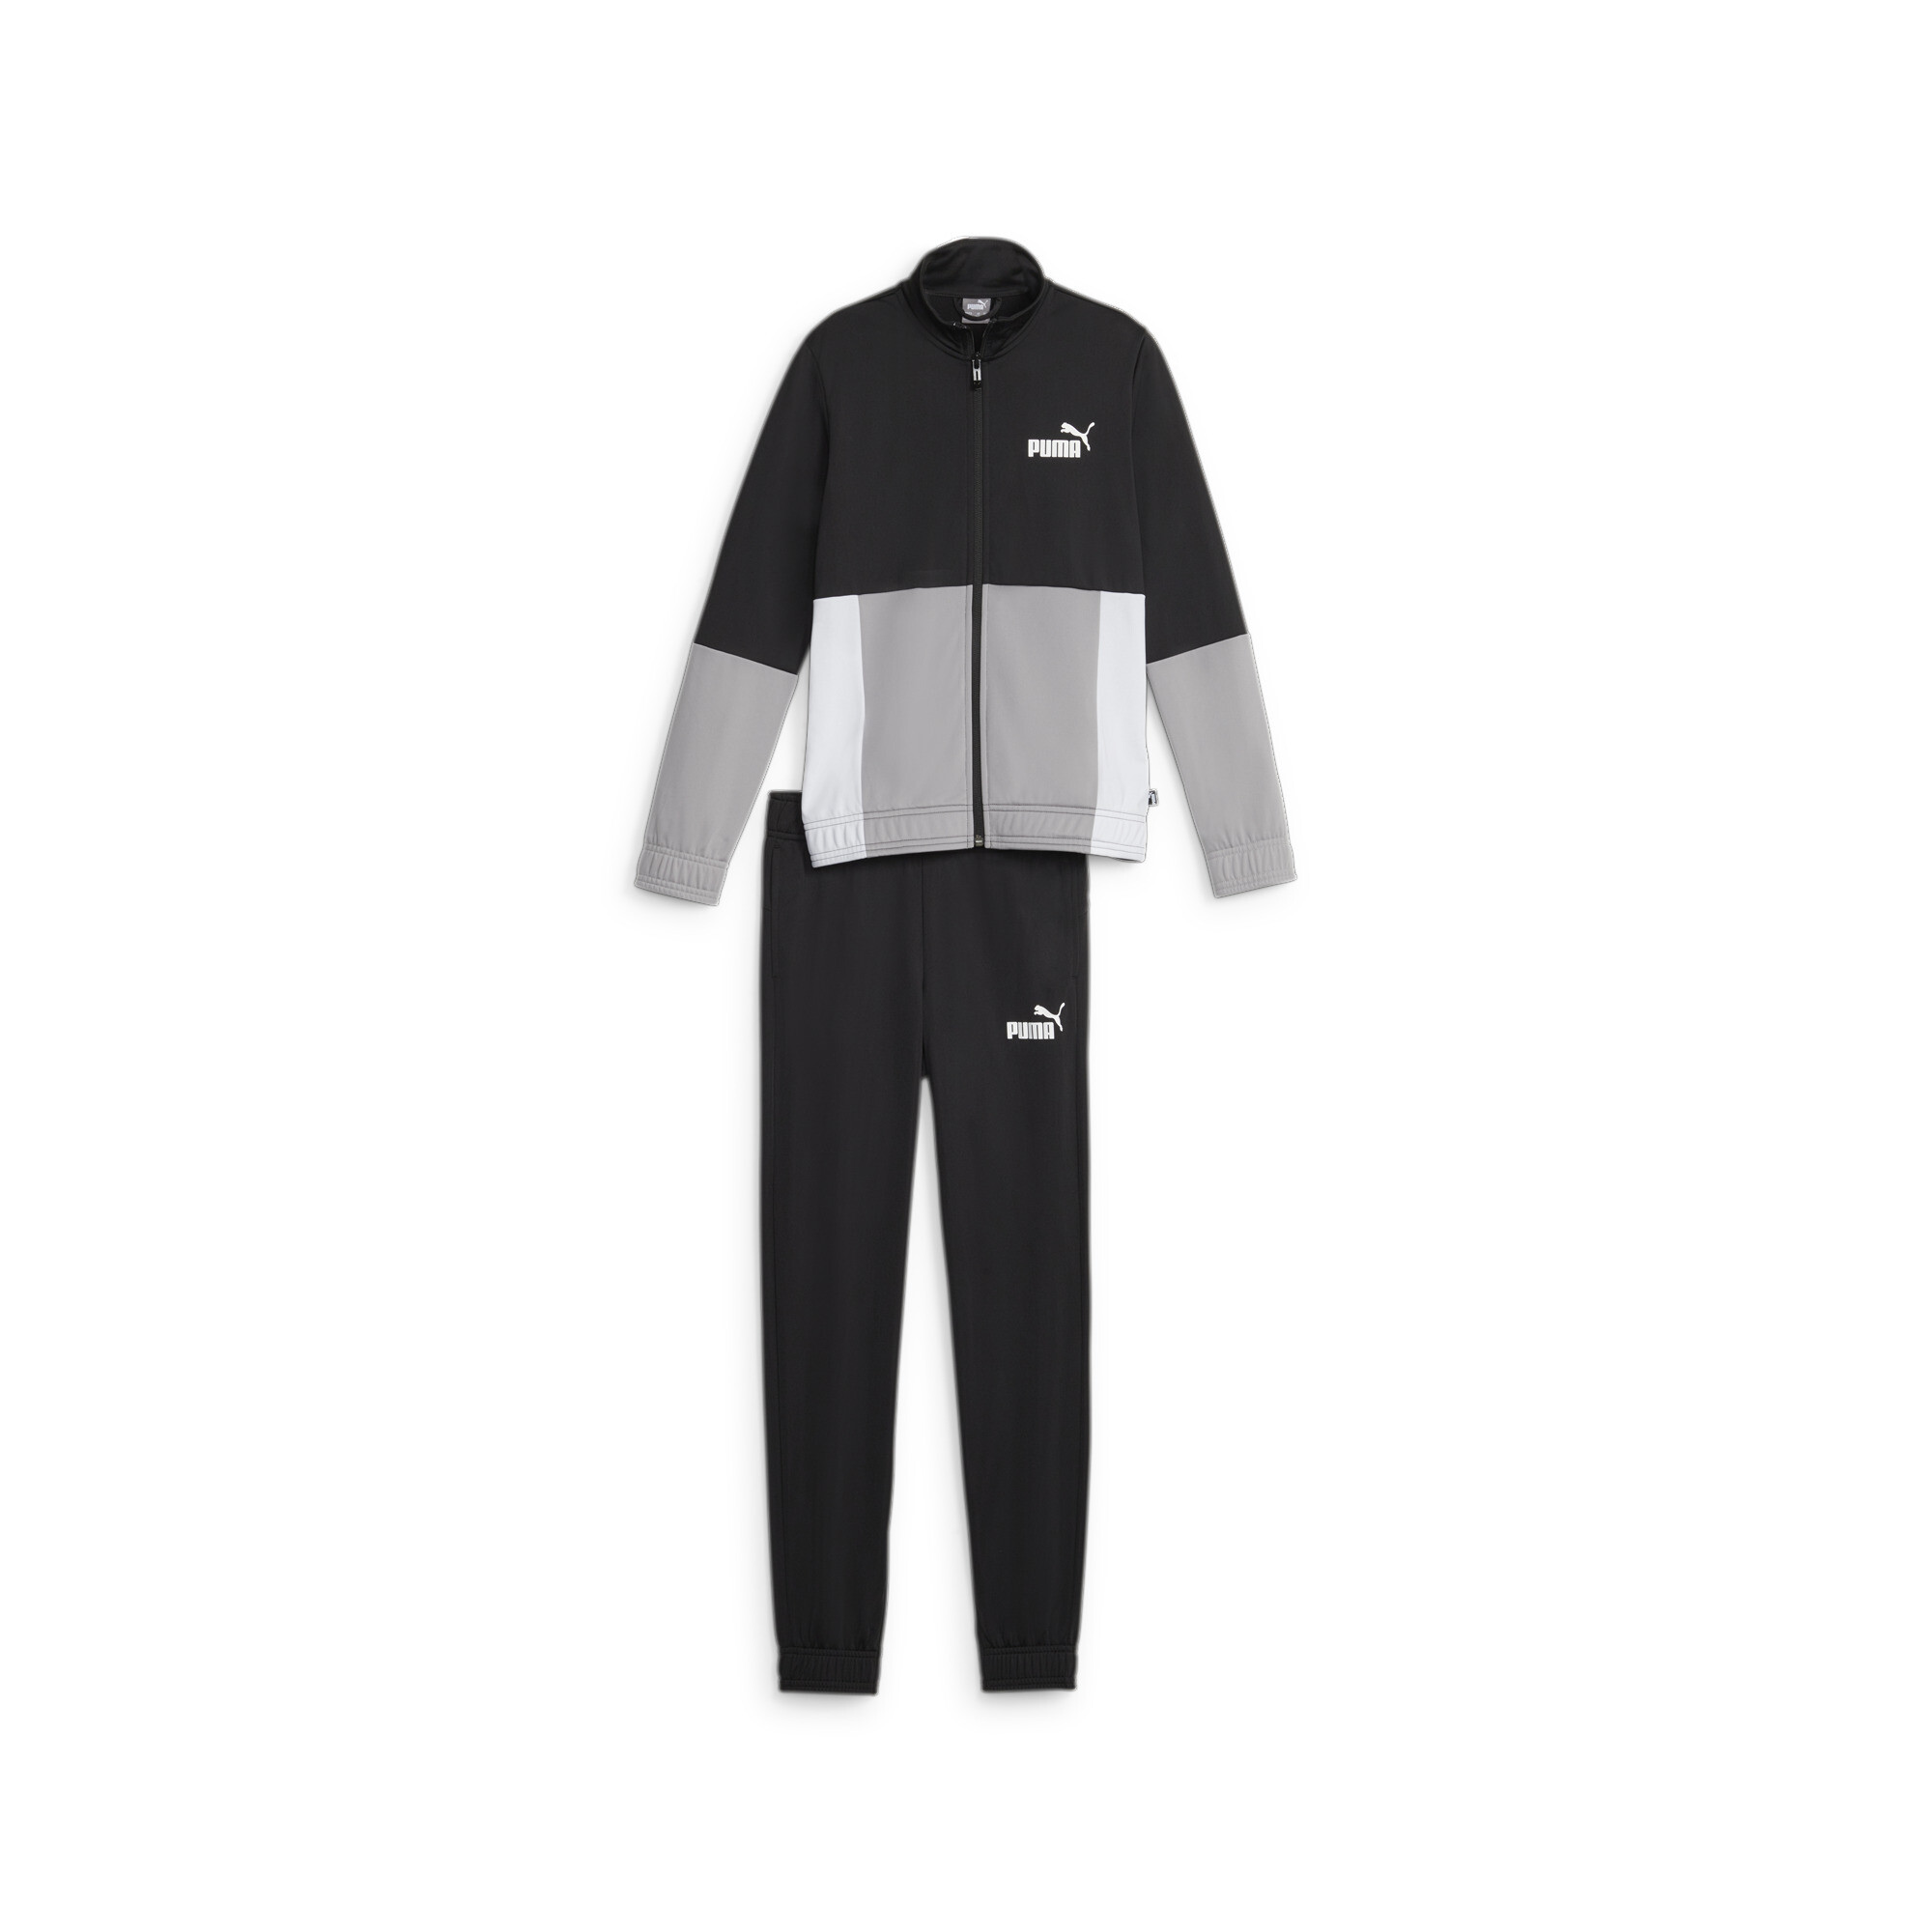 Men's Puma Colorblock Youth Poly Suit, Black, Size 9-10Y, Clothing